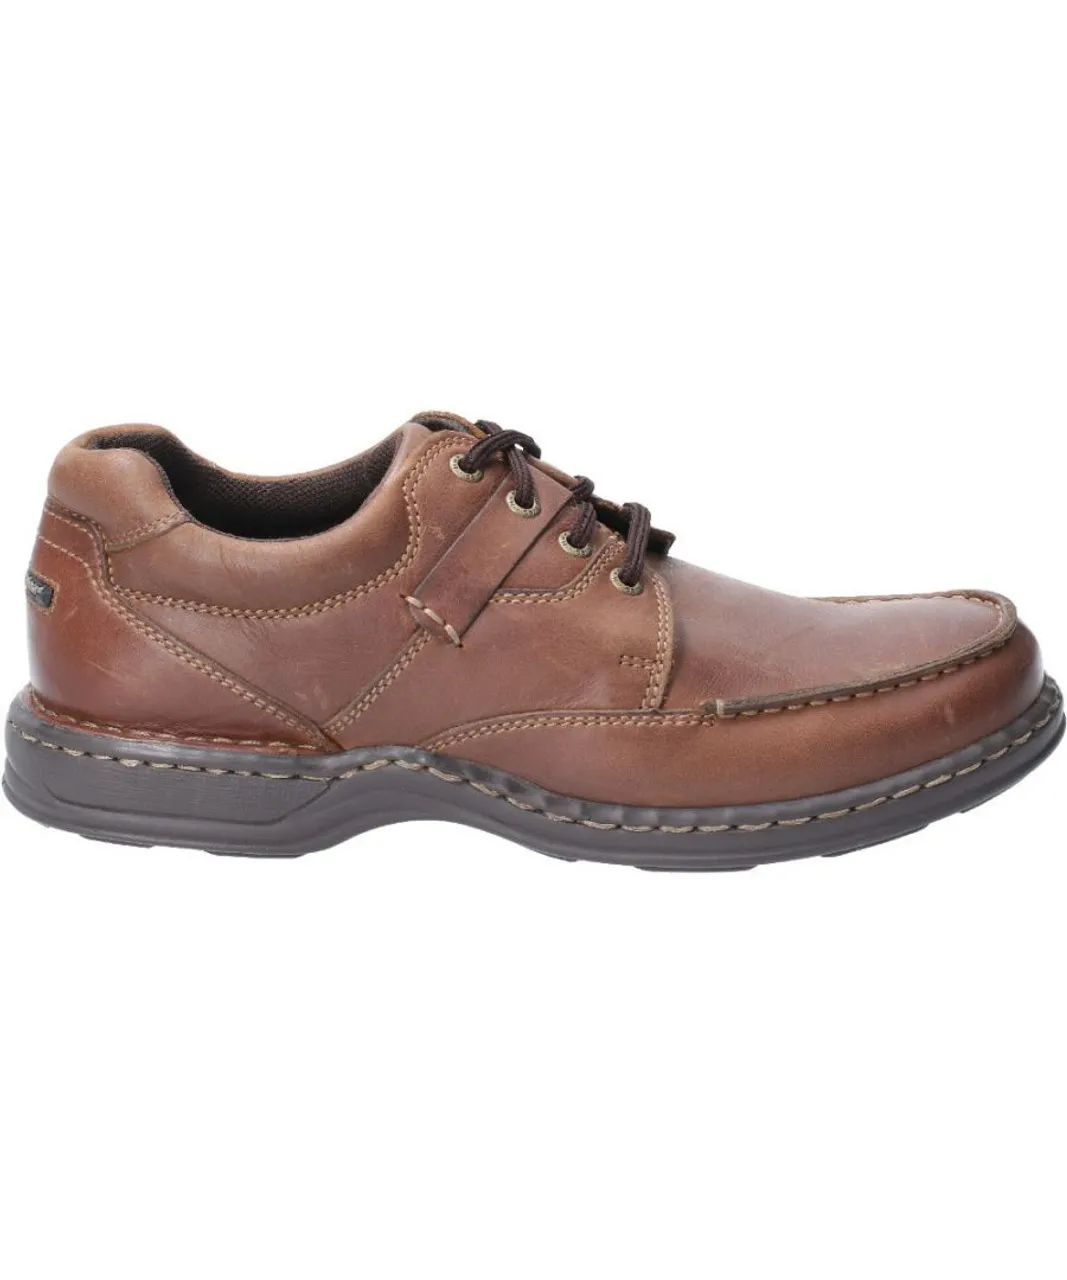 Hush Puppies Mens Randall II Laced Leather Shoe Oxford Shoes - Brown